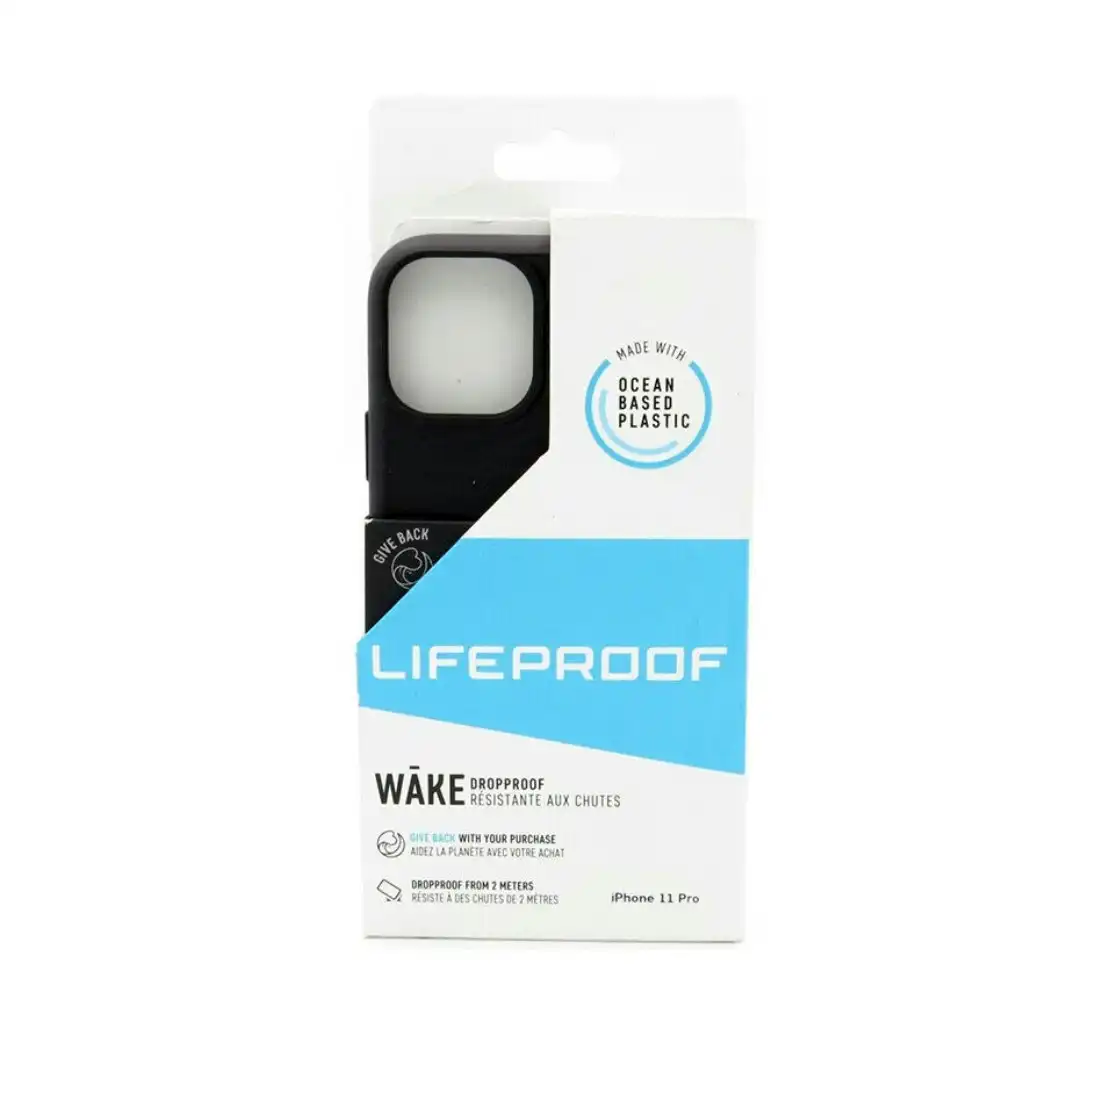 Lifeproof Wake Dropproof Case for iPhone 11 Pro - Black